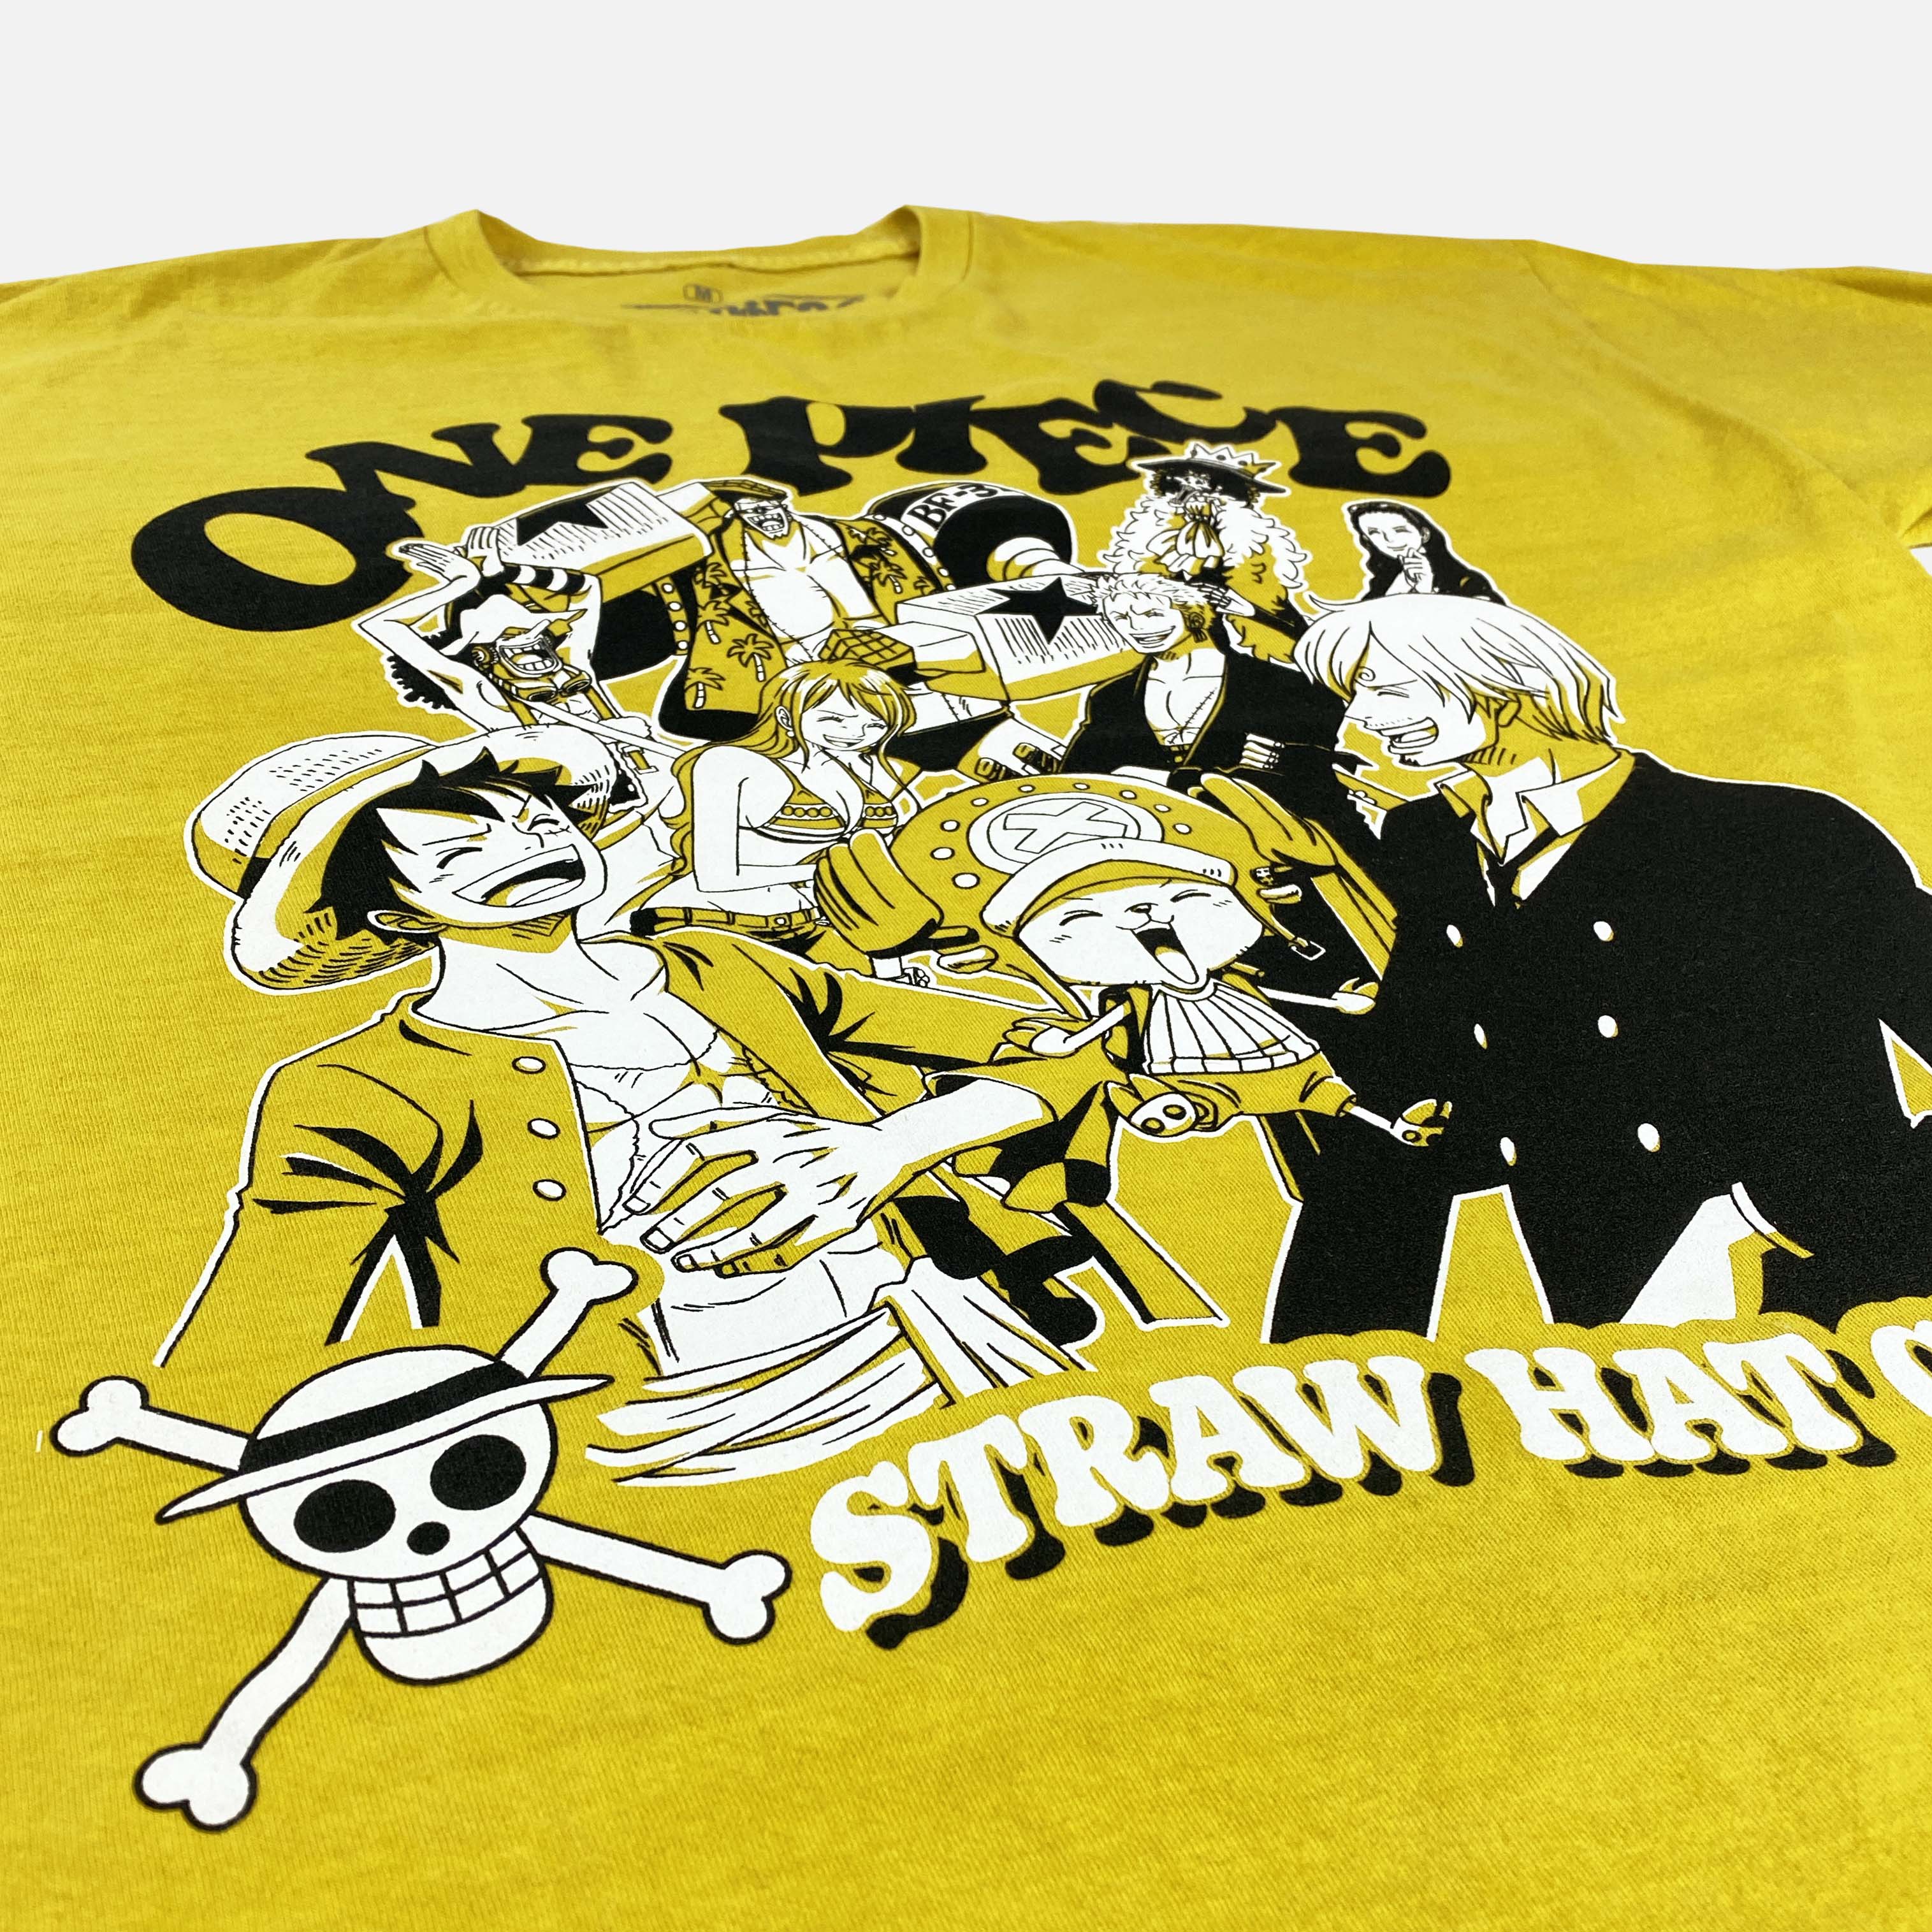 One Piece - Straw Hat Crew Laughs T-Shirt - Crunchyroll Exclusive ...